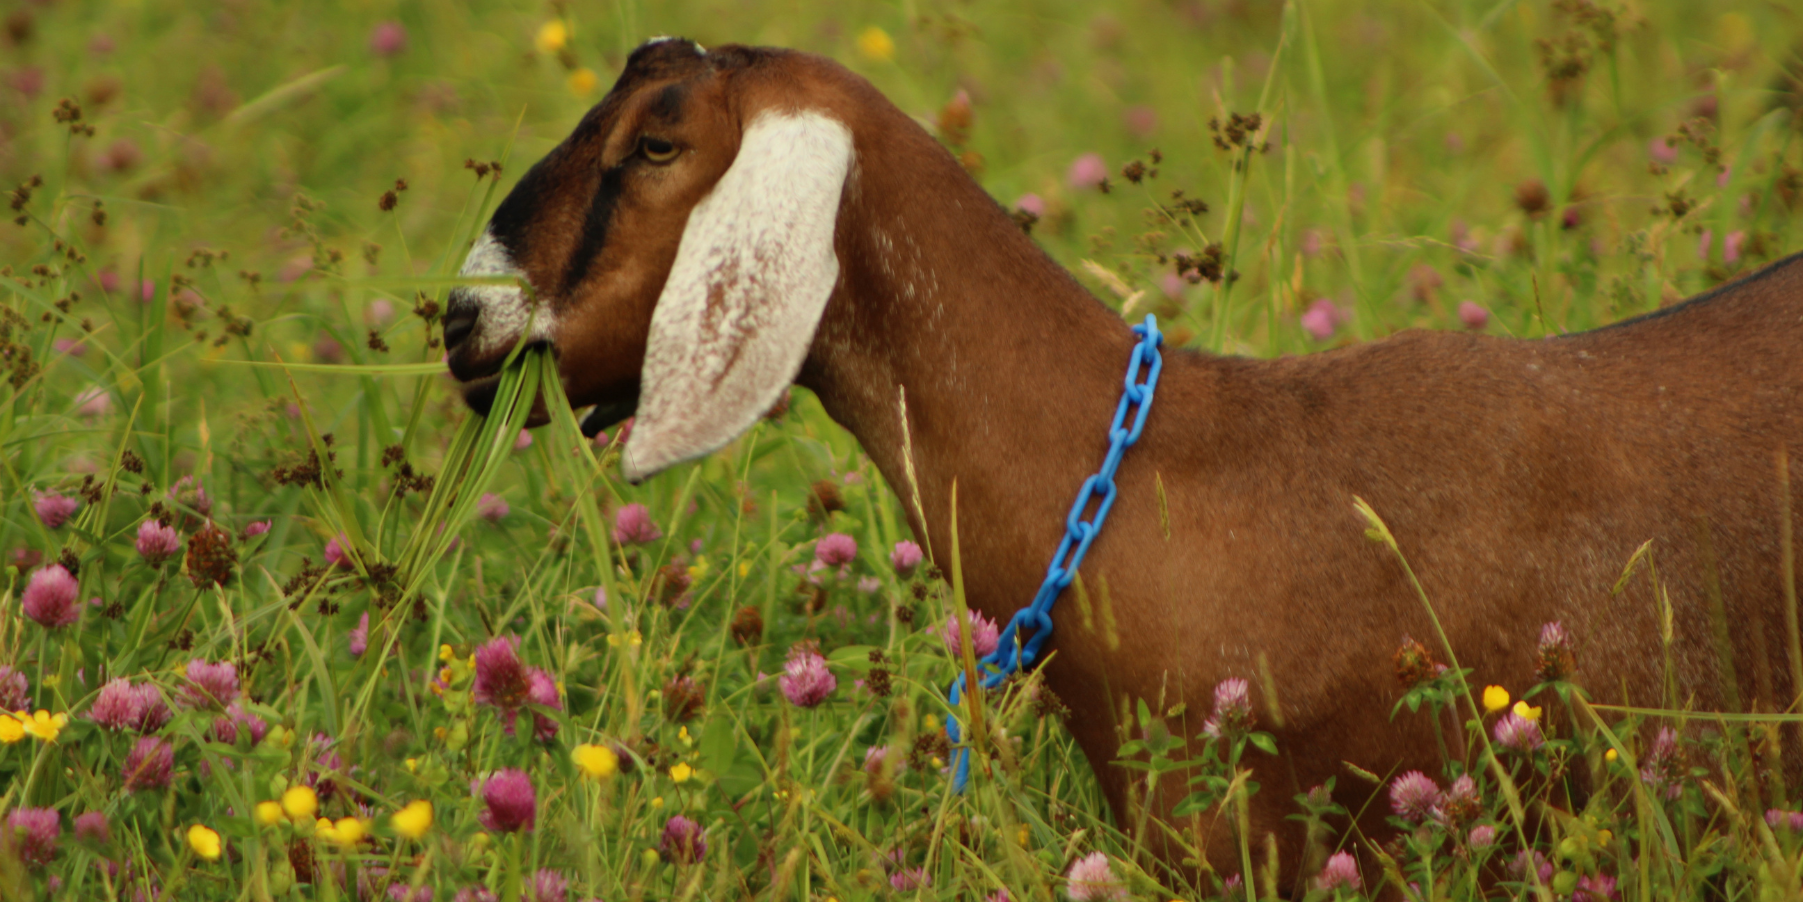 Brown nubian goat with white ears munching on hay in a field of pink and yellow flowers at the Pumpkin Vine Family Farm in Midcoast Maine.